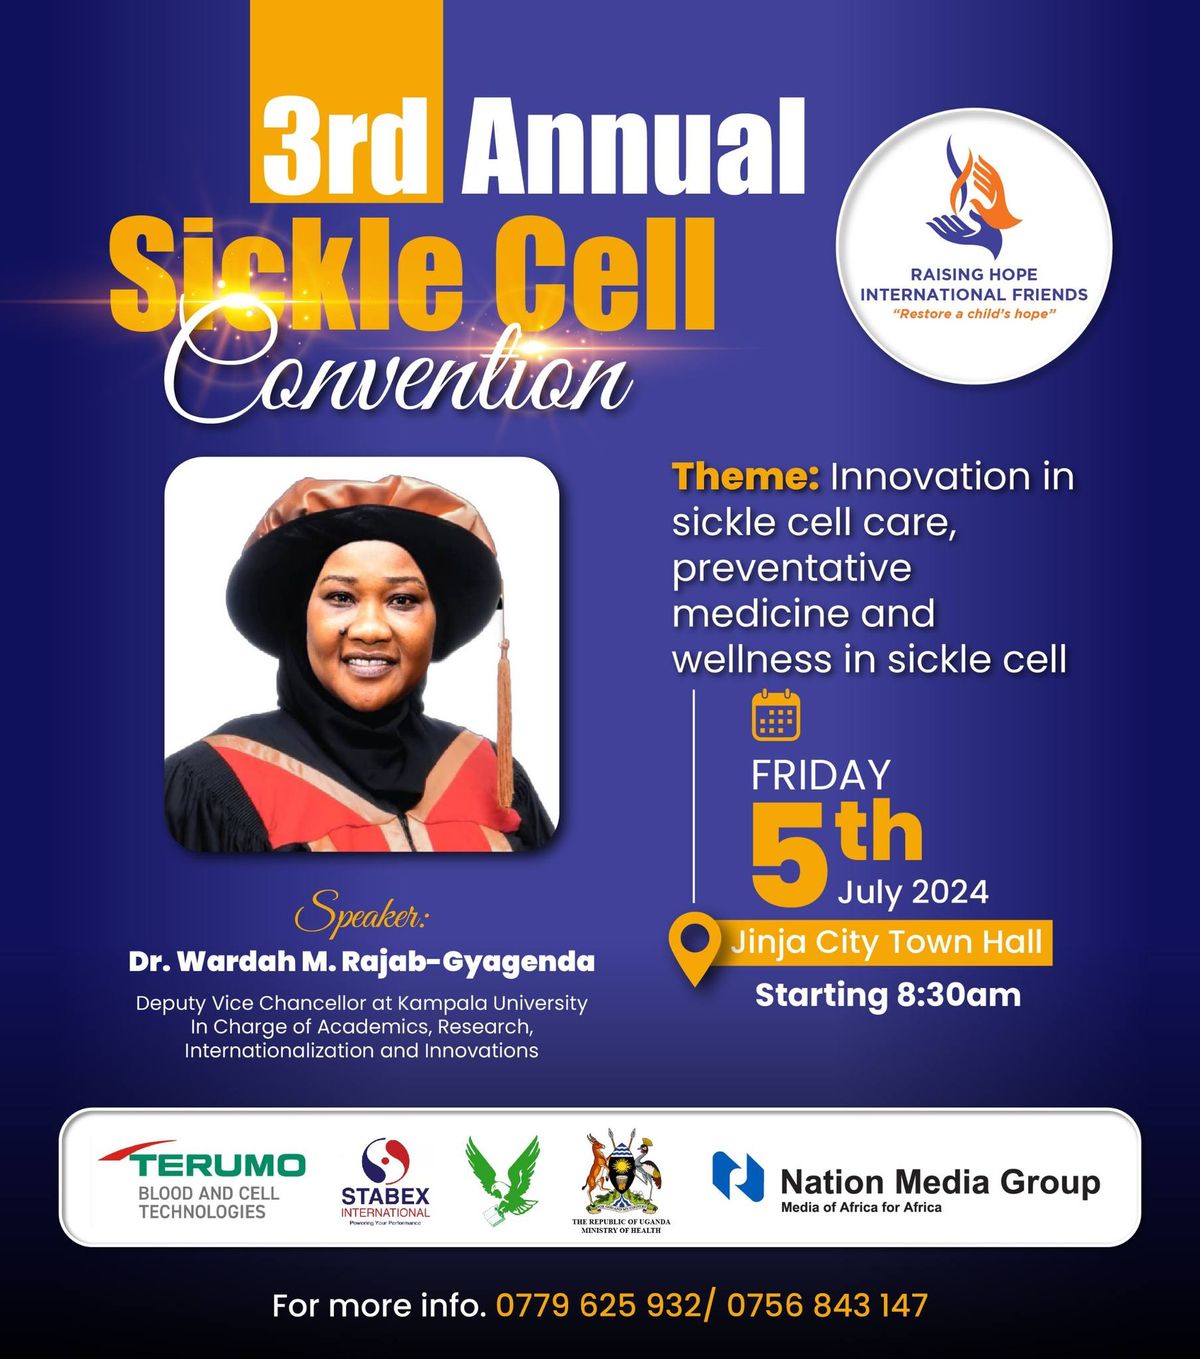 Igniting Research and Academic Excellence in Sickle Cell Care